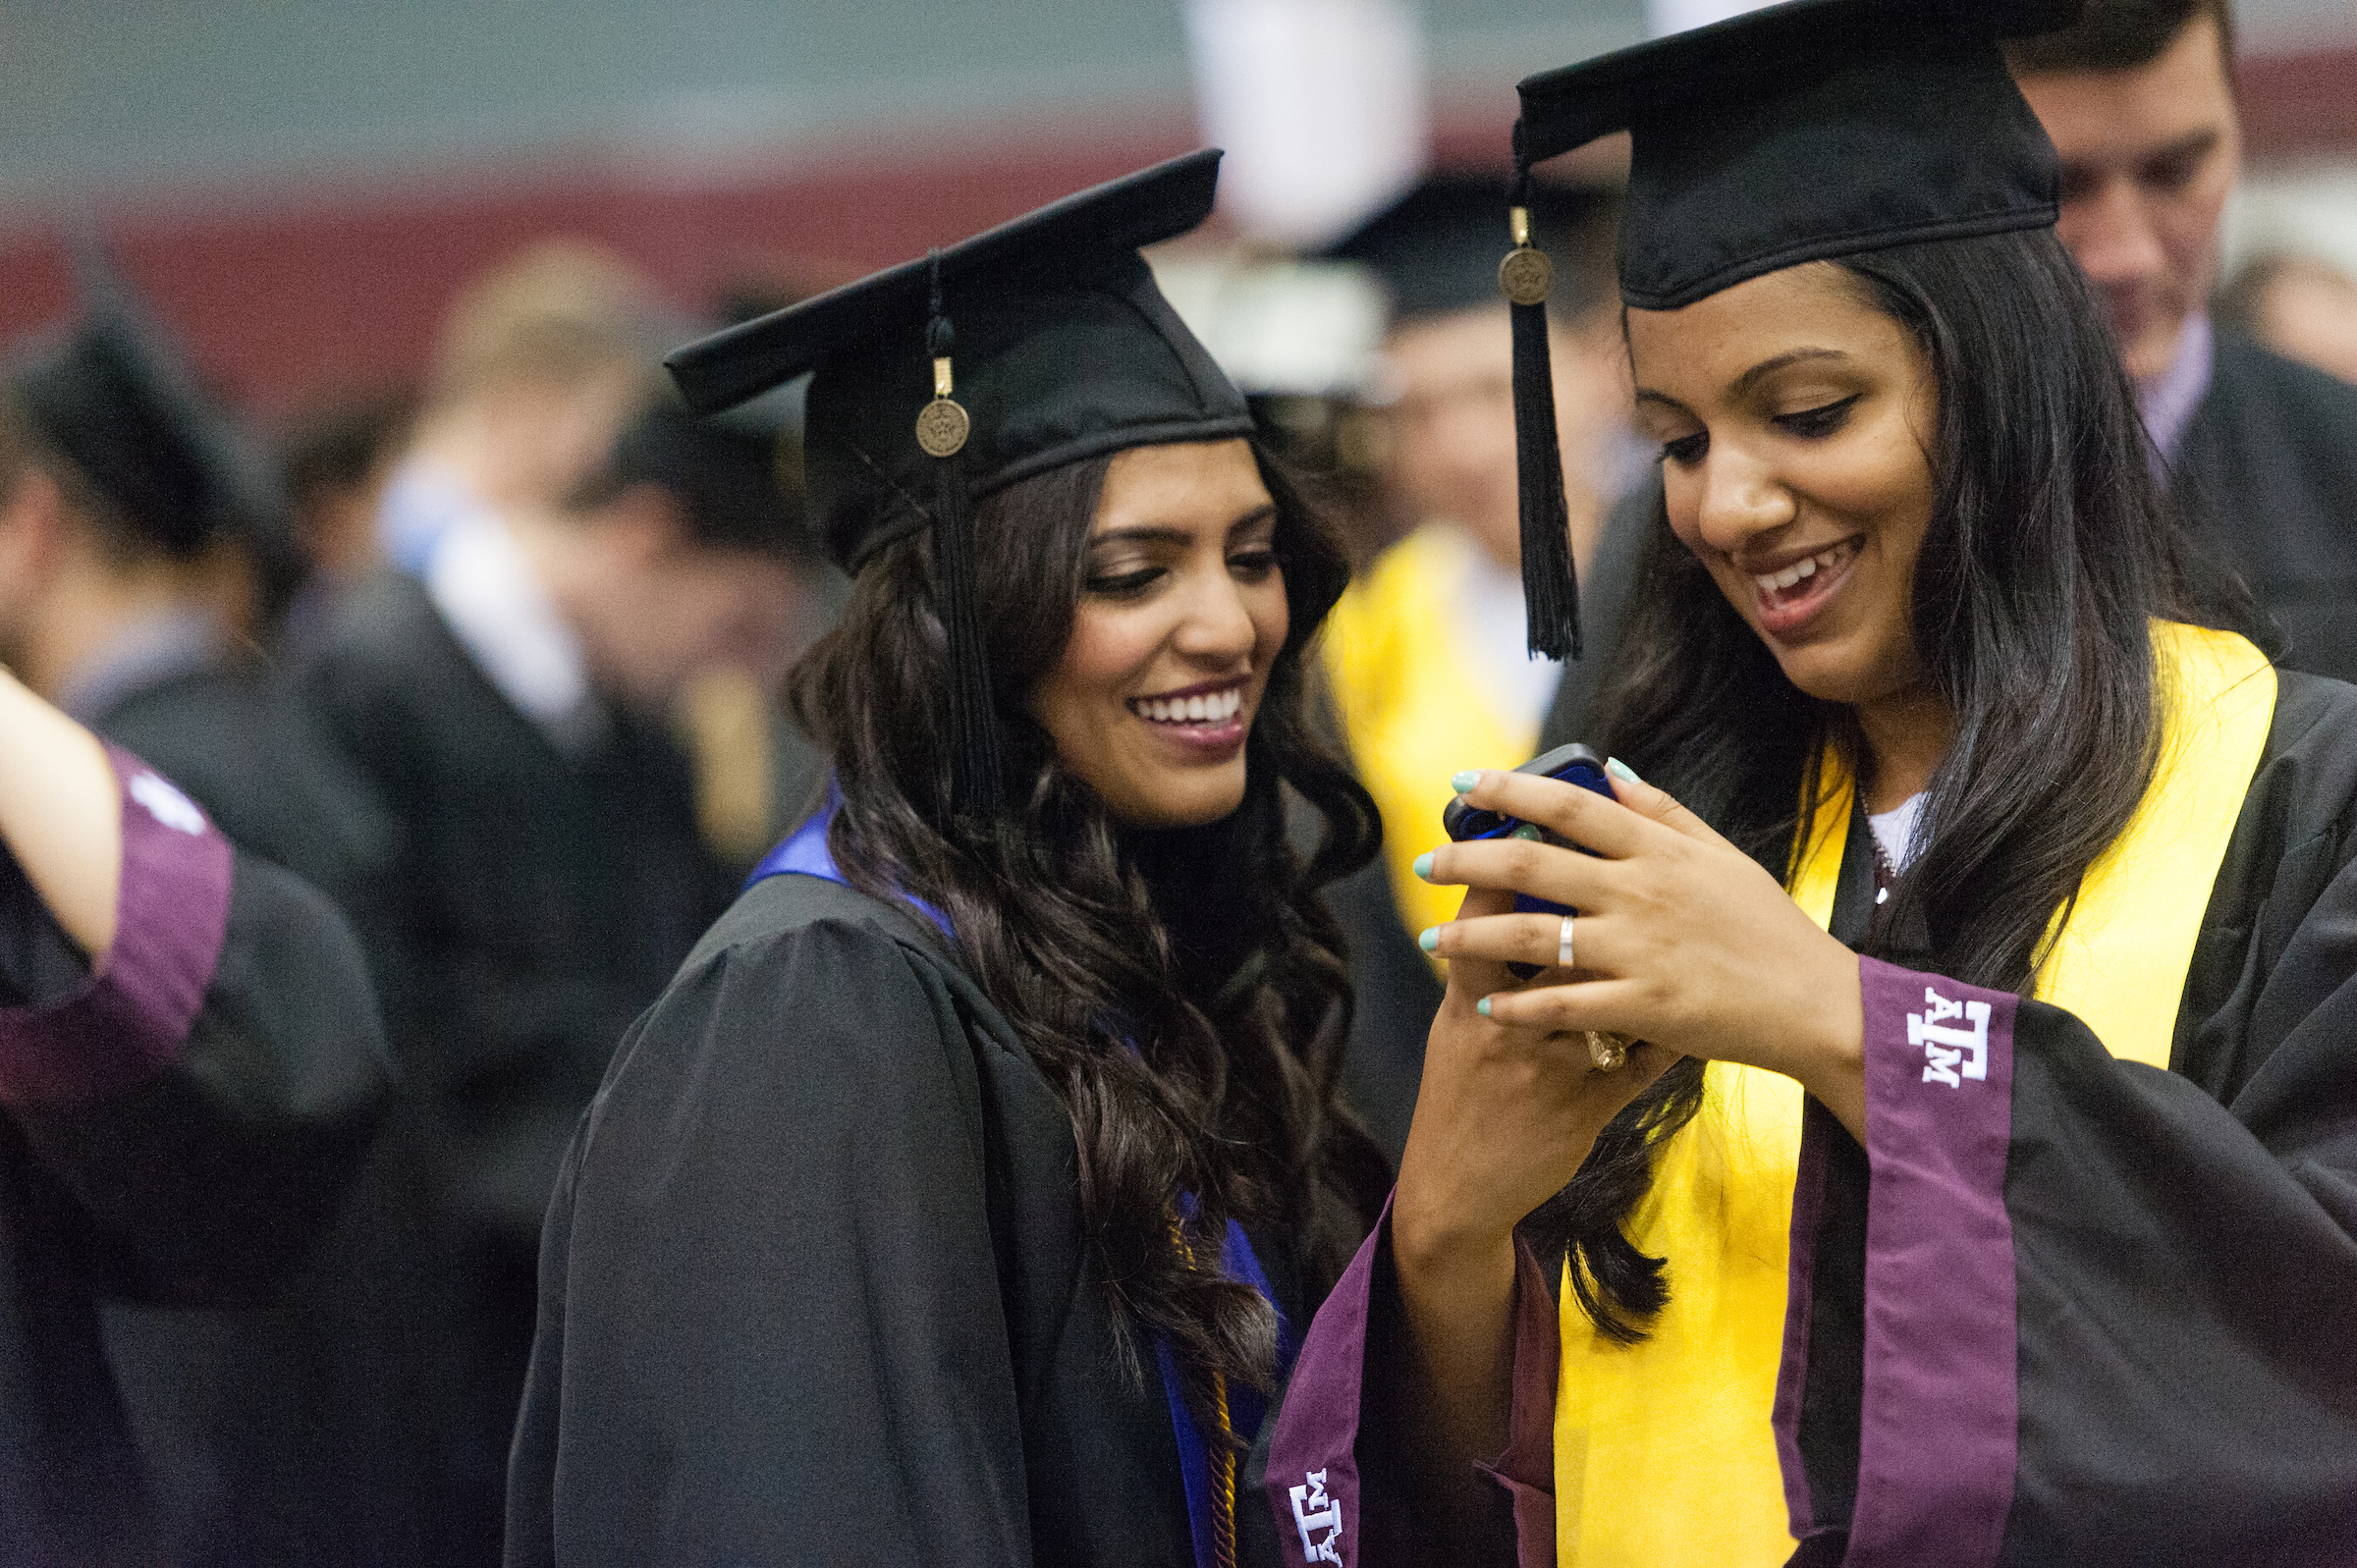 Two graduates looking at a phone